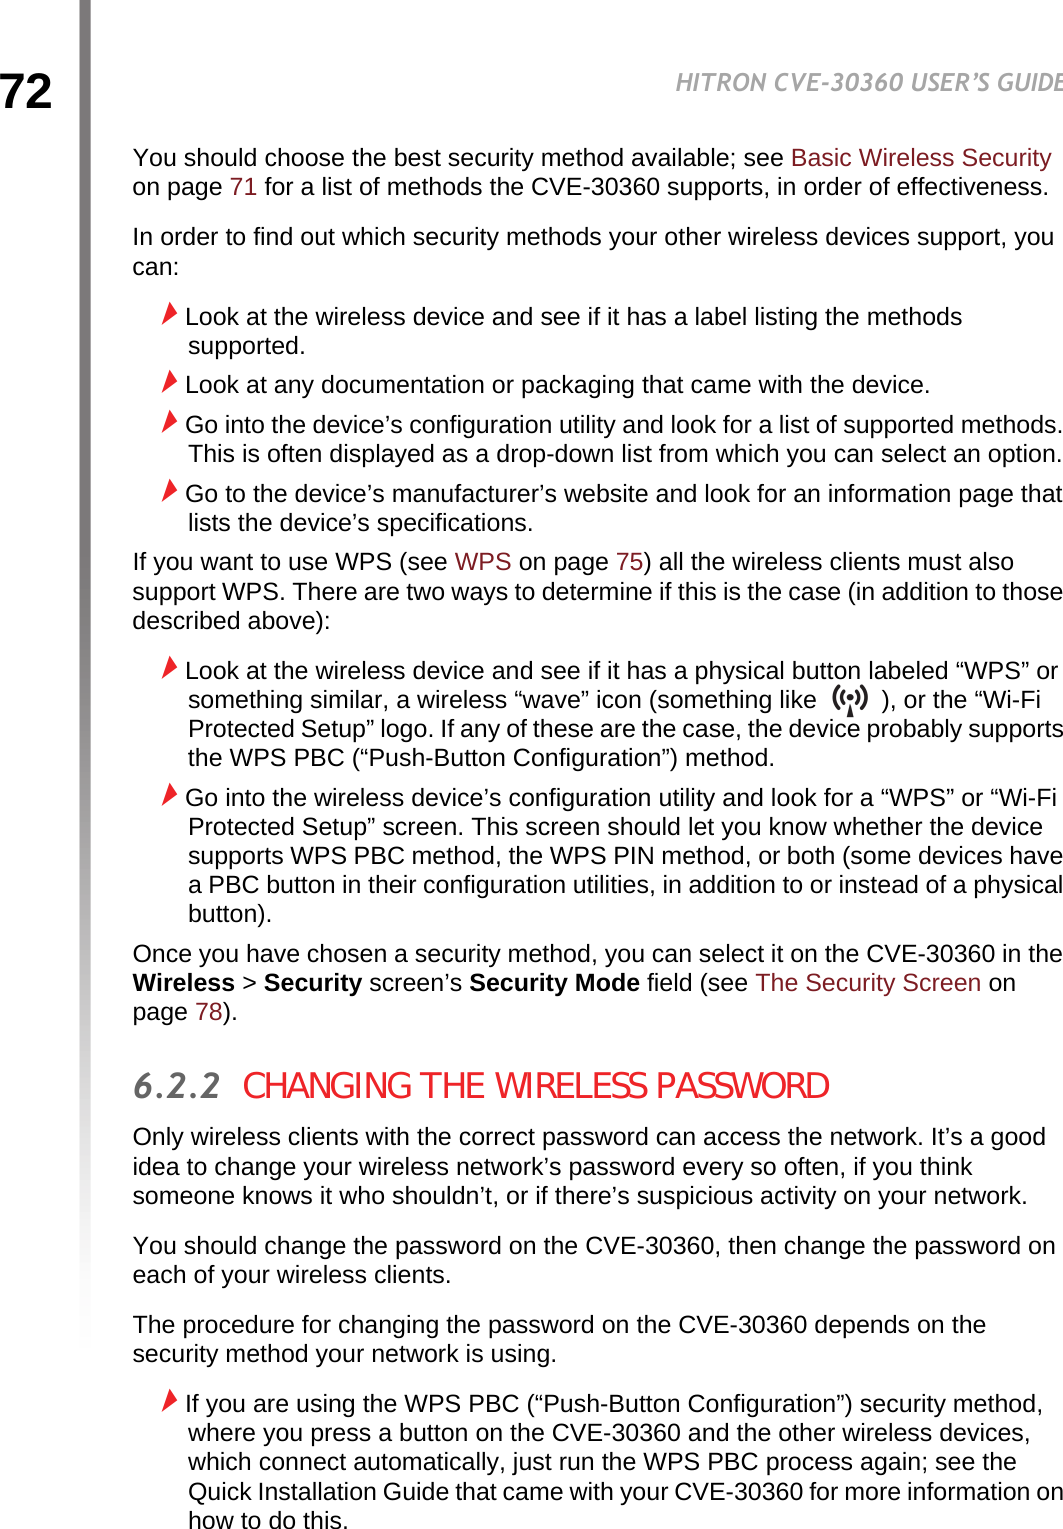 72HITRON CVE-30360 USER’S GUIDEWIRELESSYou should choose the best security method available; see Basic Wireless Security on page 71 for a list of methods the CVE-30360 supports, in order of effectiveness.In order to find out which security methods your other wireless devices support, you can:Look at the wireless device and see if it has a label listing the methods supported.Look at any documentation or packaging that came with the device.Go into the device’s configuration utility and look for a list of supported methods. This is often displayed as a drop-down list from which you can select an option.Go to the device’s manufacturer’s website and look for an information page that lists the device’s specifications.If you want to use WPS (see WPS on page 75) all the wireless clients must also support WPS. There are two ways to determine if this is the case (in addition to those described above):Look at the wireless device and see if it has a physical button labeled “WPS” or something similar, a wireless “wave” icon (something like   ), or the “Wi-Fi Protected Setup” logo. If any of these are the case, the device probably supports the WPS PBC (“Push-Button Configuration”) method.Go into the wireless device’s configuration utility and look for a “WPS” or “Wi-Fi Protected Setup” screen. This screen should let you know whether the device supports WPS PBC method, the WPS PIN method, or both (some devices have a PBC button in their configuration utilities, in addition to or instead of a physical button).Once you have chosen a security method, you can select it on the CVE-30360 in the Wireless &gt; Security screen’s Security Mode field (see The Security Screen on page 78).6.2.2  CHANGING THE WIRELESS PASSWORDOnly wireless clients with the correct password can access the network. It’s a good idea to change your wireless network’s password every so often, if you think someone knows it who shouldn’t, or if there’s suspicious activity on your network.You should change the password on the CVE-30360, then change the password on each of your wireless clients.The procedure for changing the password on the CVE-30360 depends on the security method your network is using.If you are using the WPS PBC (“Push-Button Configuration”) security method, where you press a button on the CVE-30360 and the other wireless devices, which connect automatically, just run the WPS PBC process again; see the Quick Installation Guide that came with your CVE-30360 for more information on how to do this.